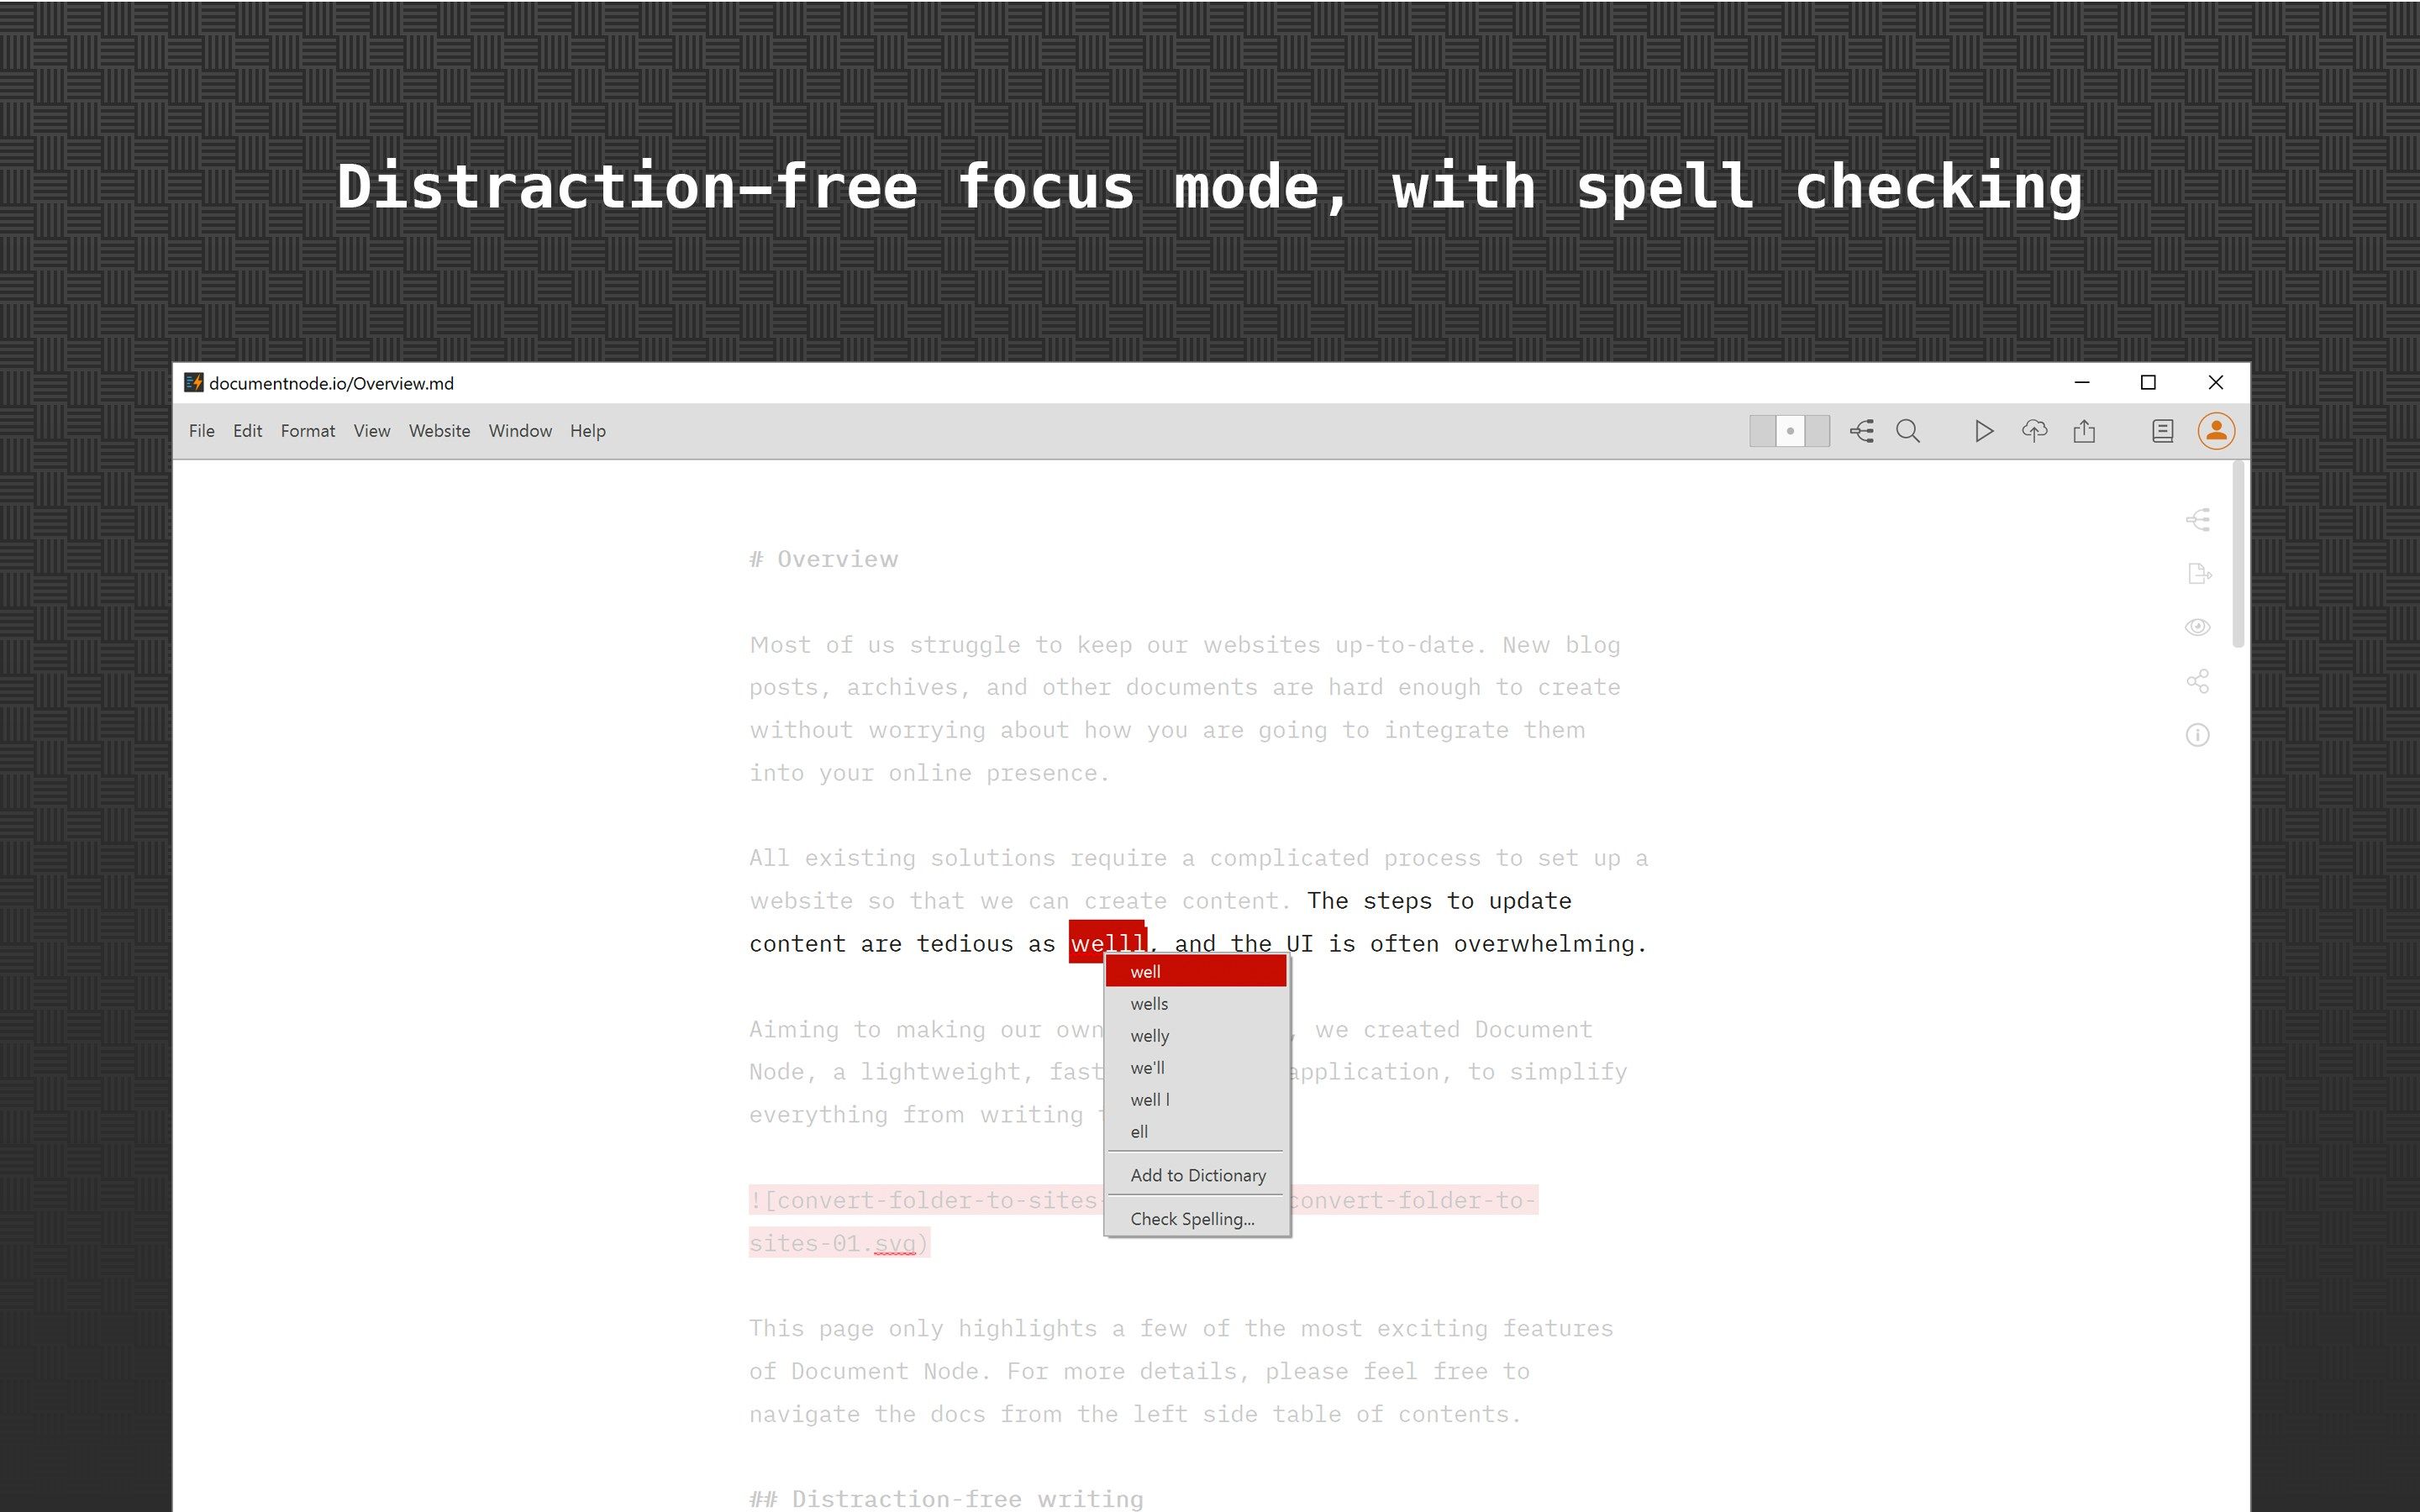 Distraction-free focus mode, with spell checking